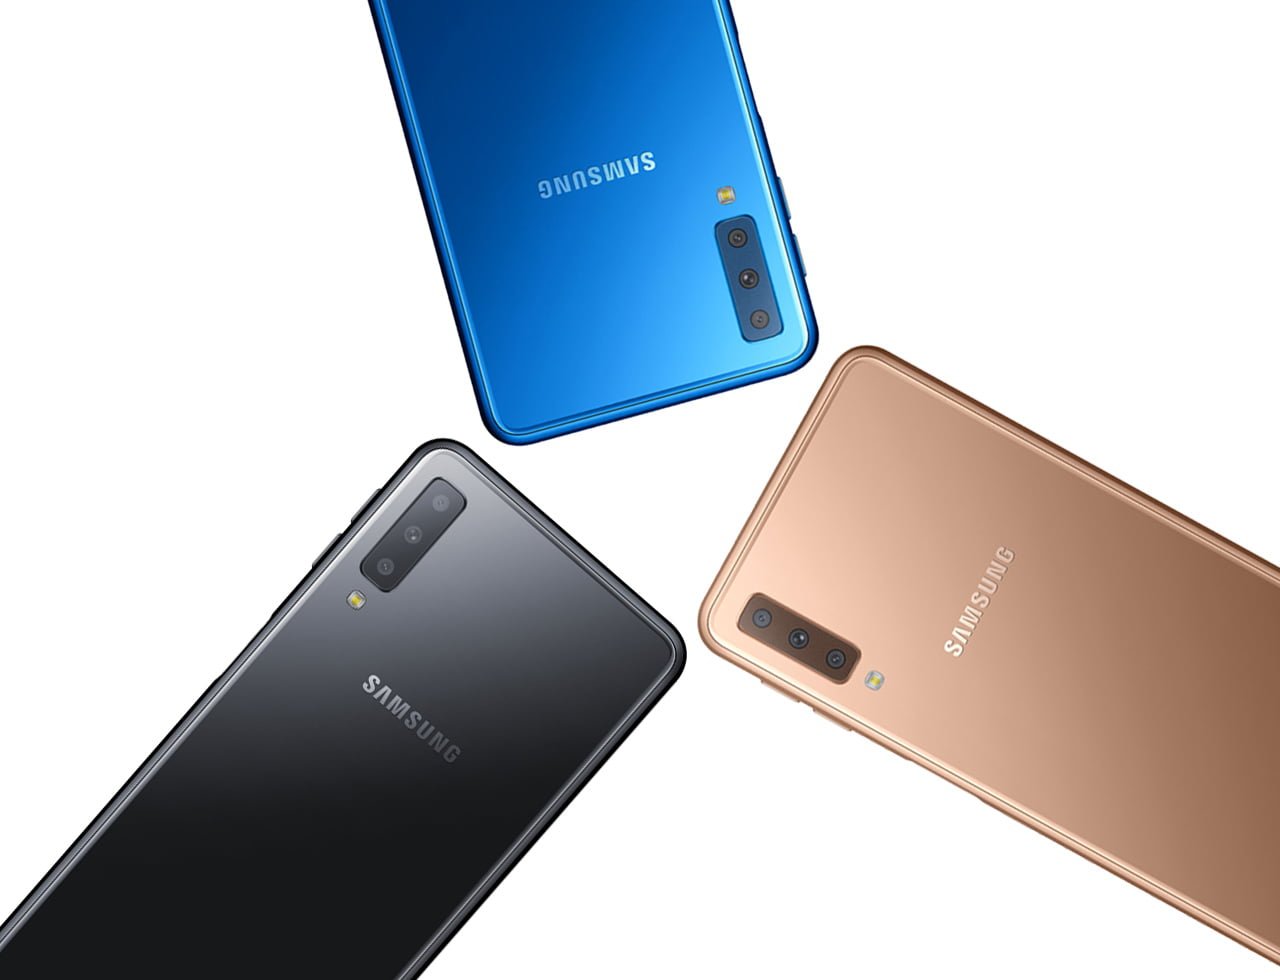 Samsung Galaxy A7 2018 (SM-A750F) specifications , images and price